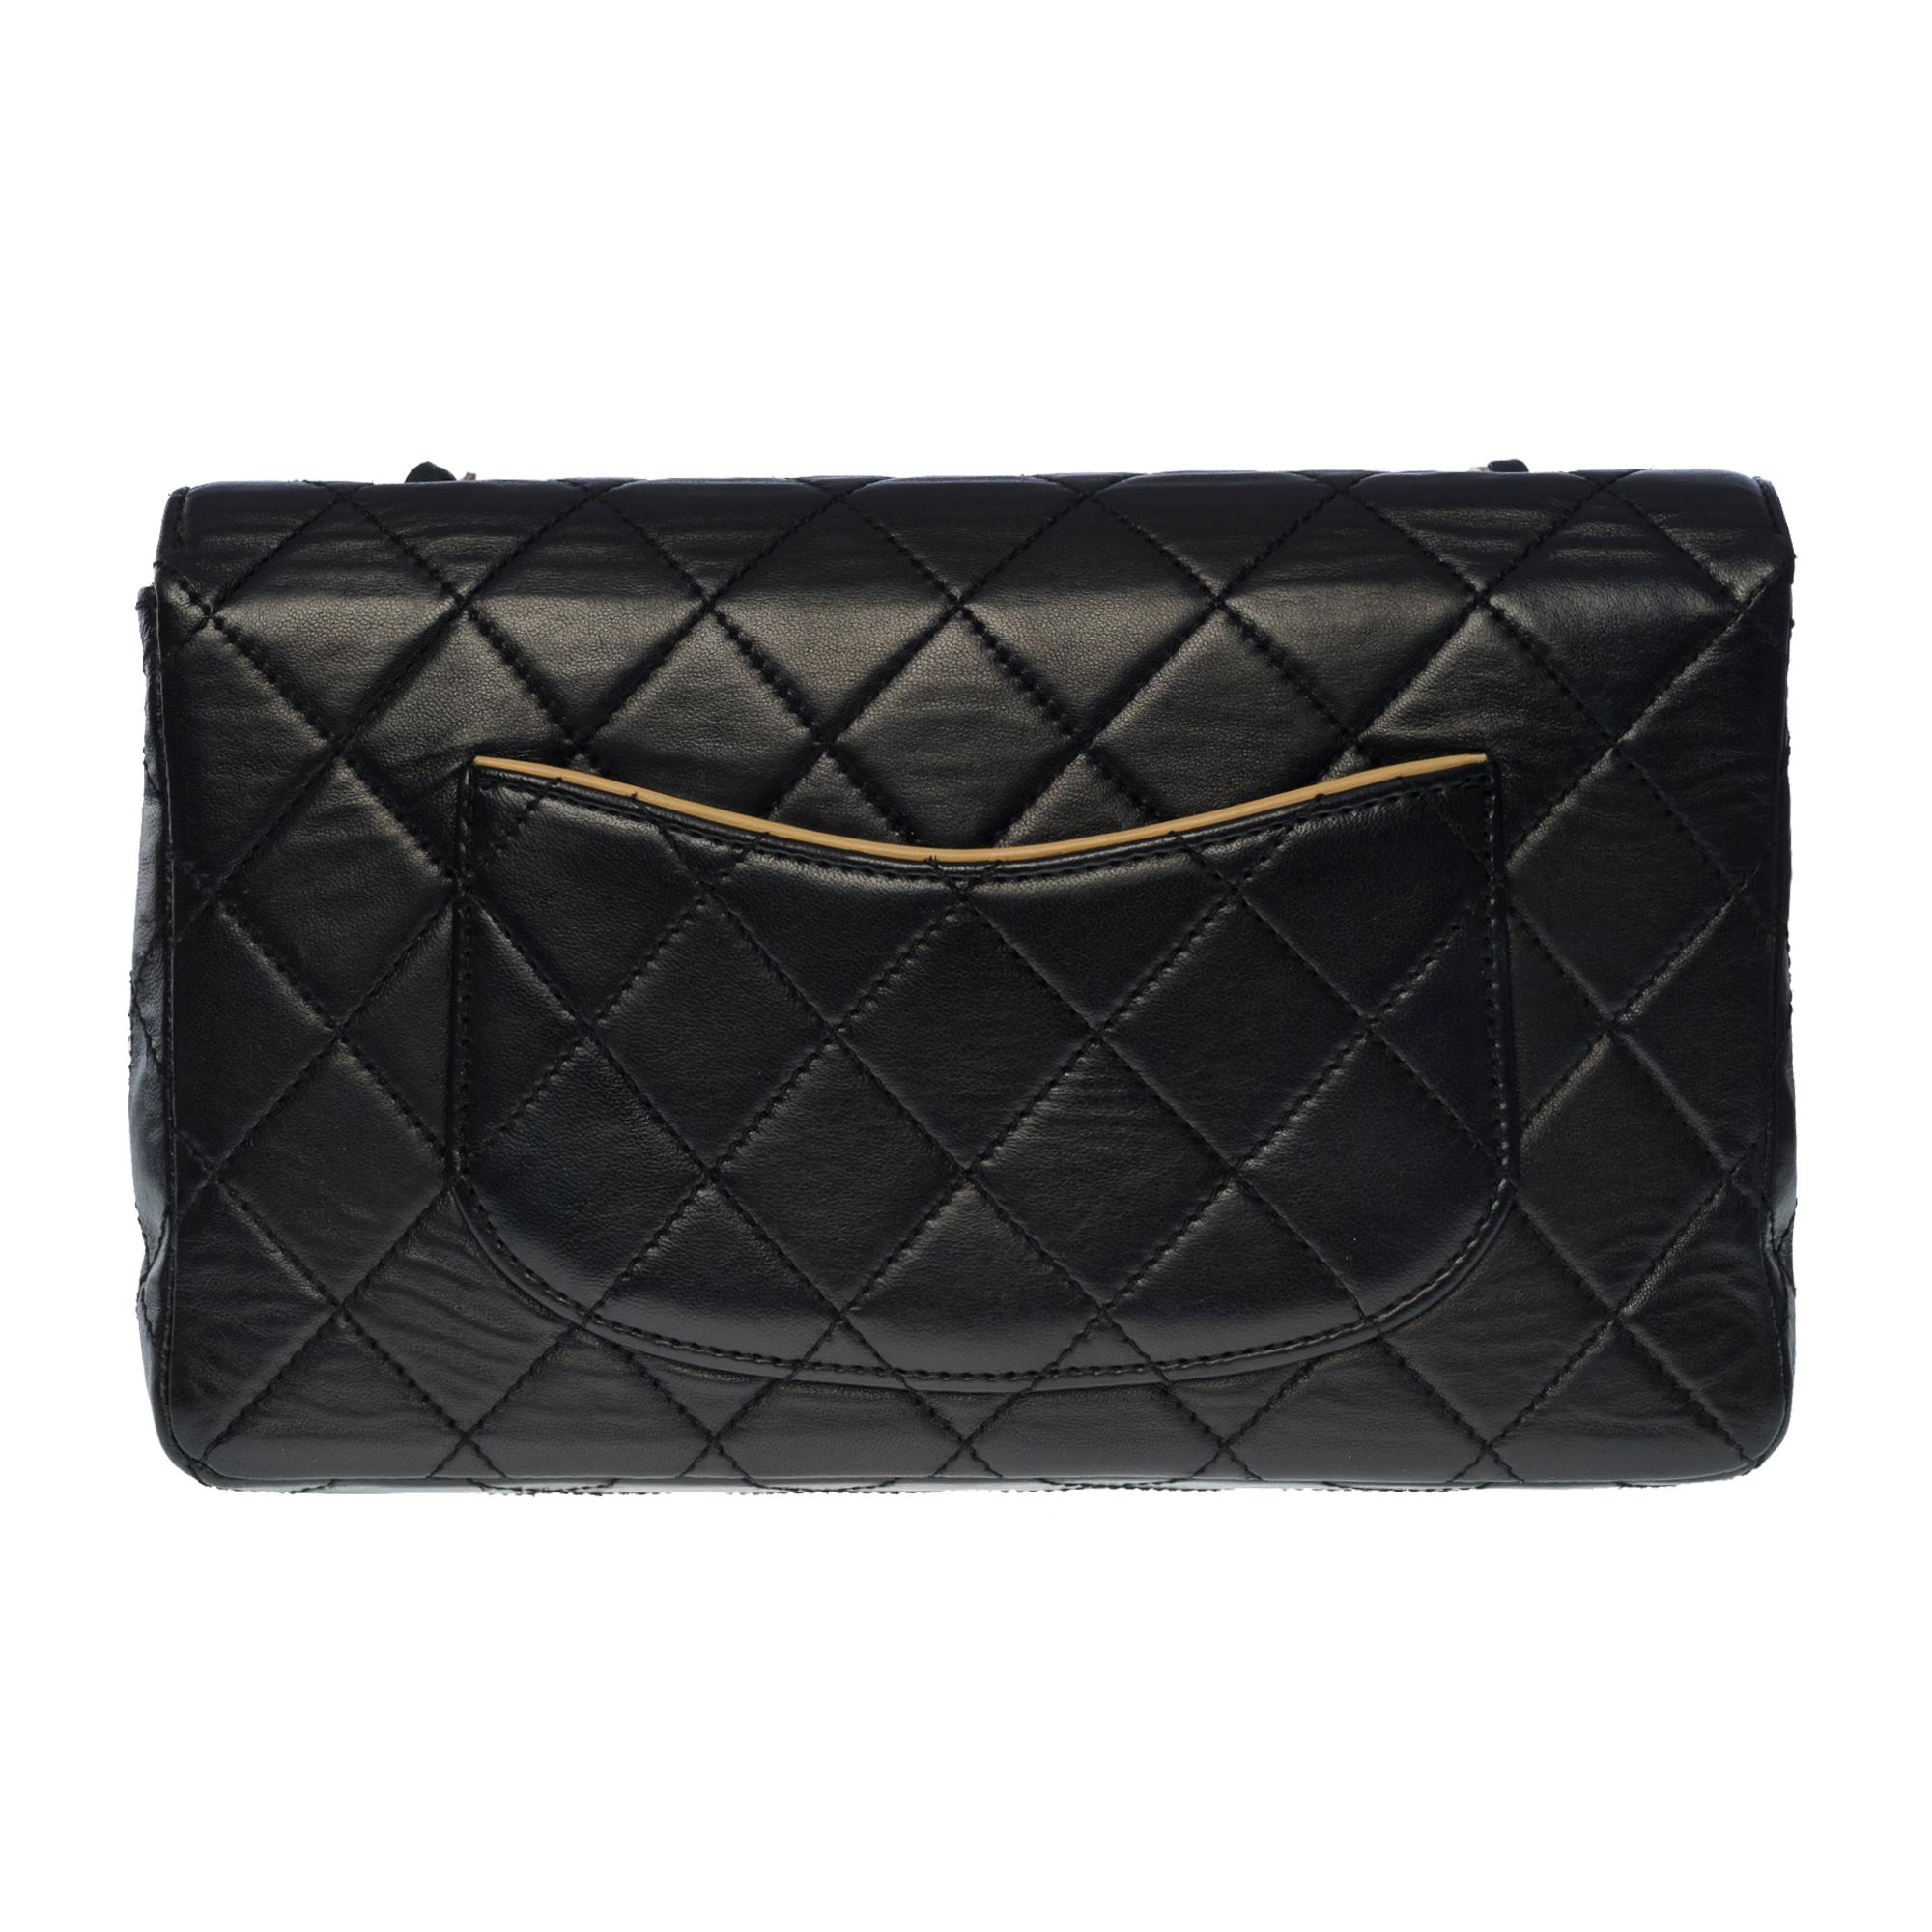 Gorgeous Chanel Timeless Medium Limited Edition single flap shoulder bag in Black & Beige Two-Tone quilted lamb leather, matt silver metal hardware, black leather Interlaced silver metal chain
closure by flap, clasp signed CC silver matt
Black